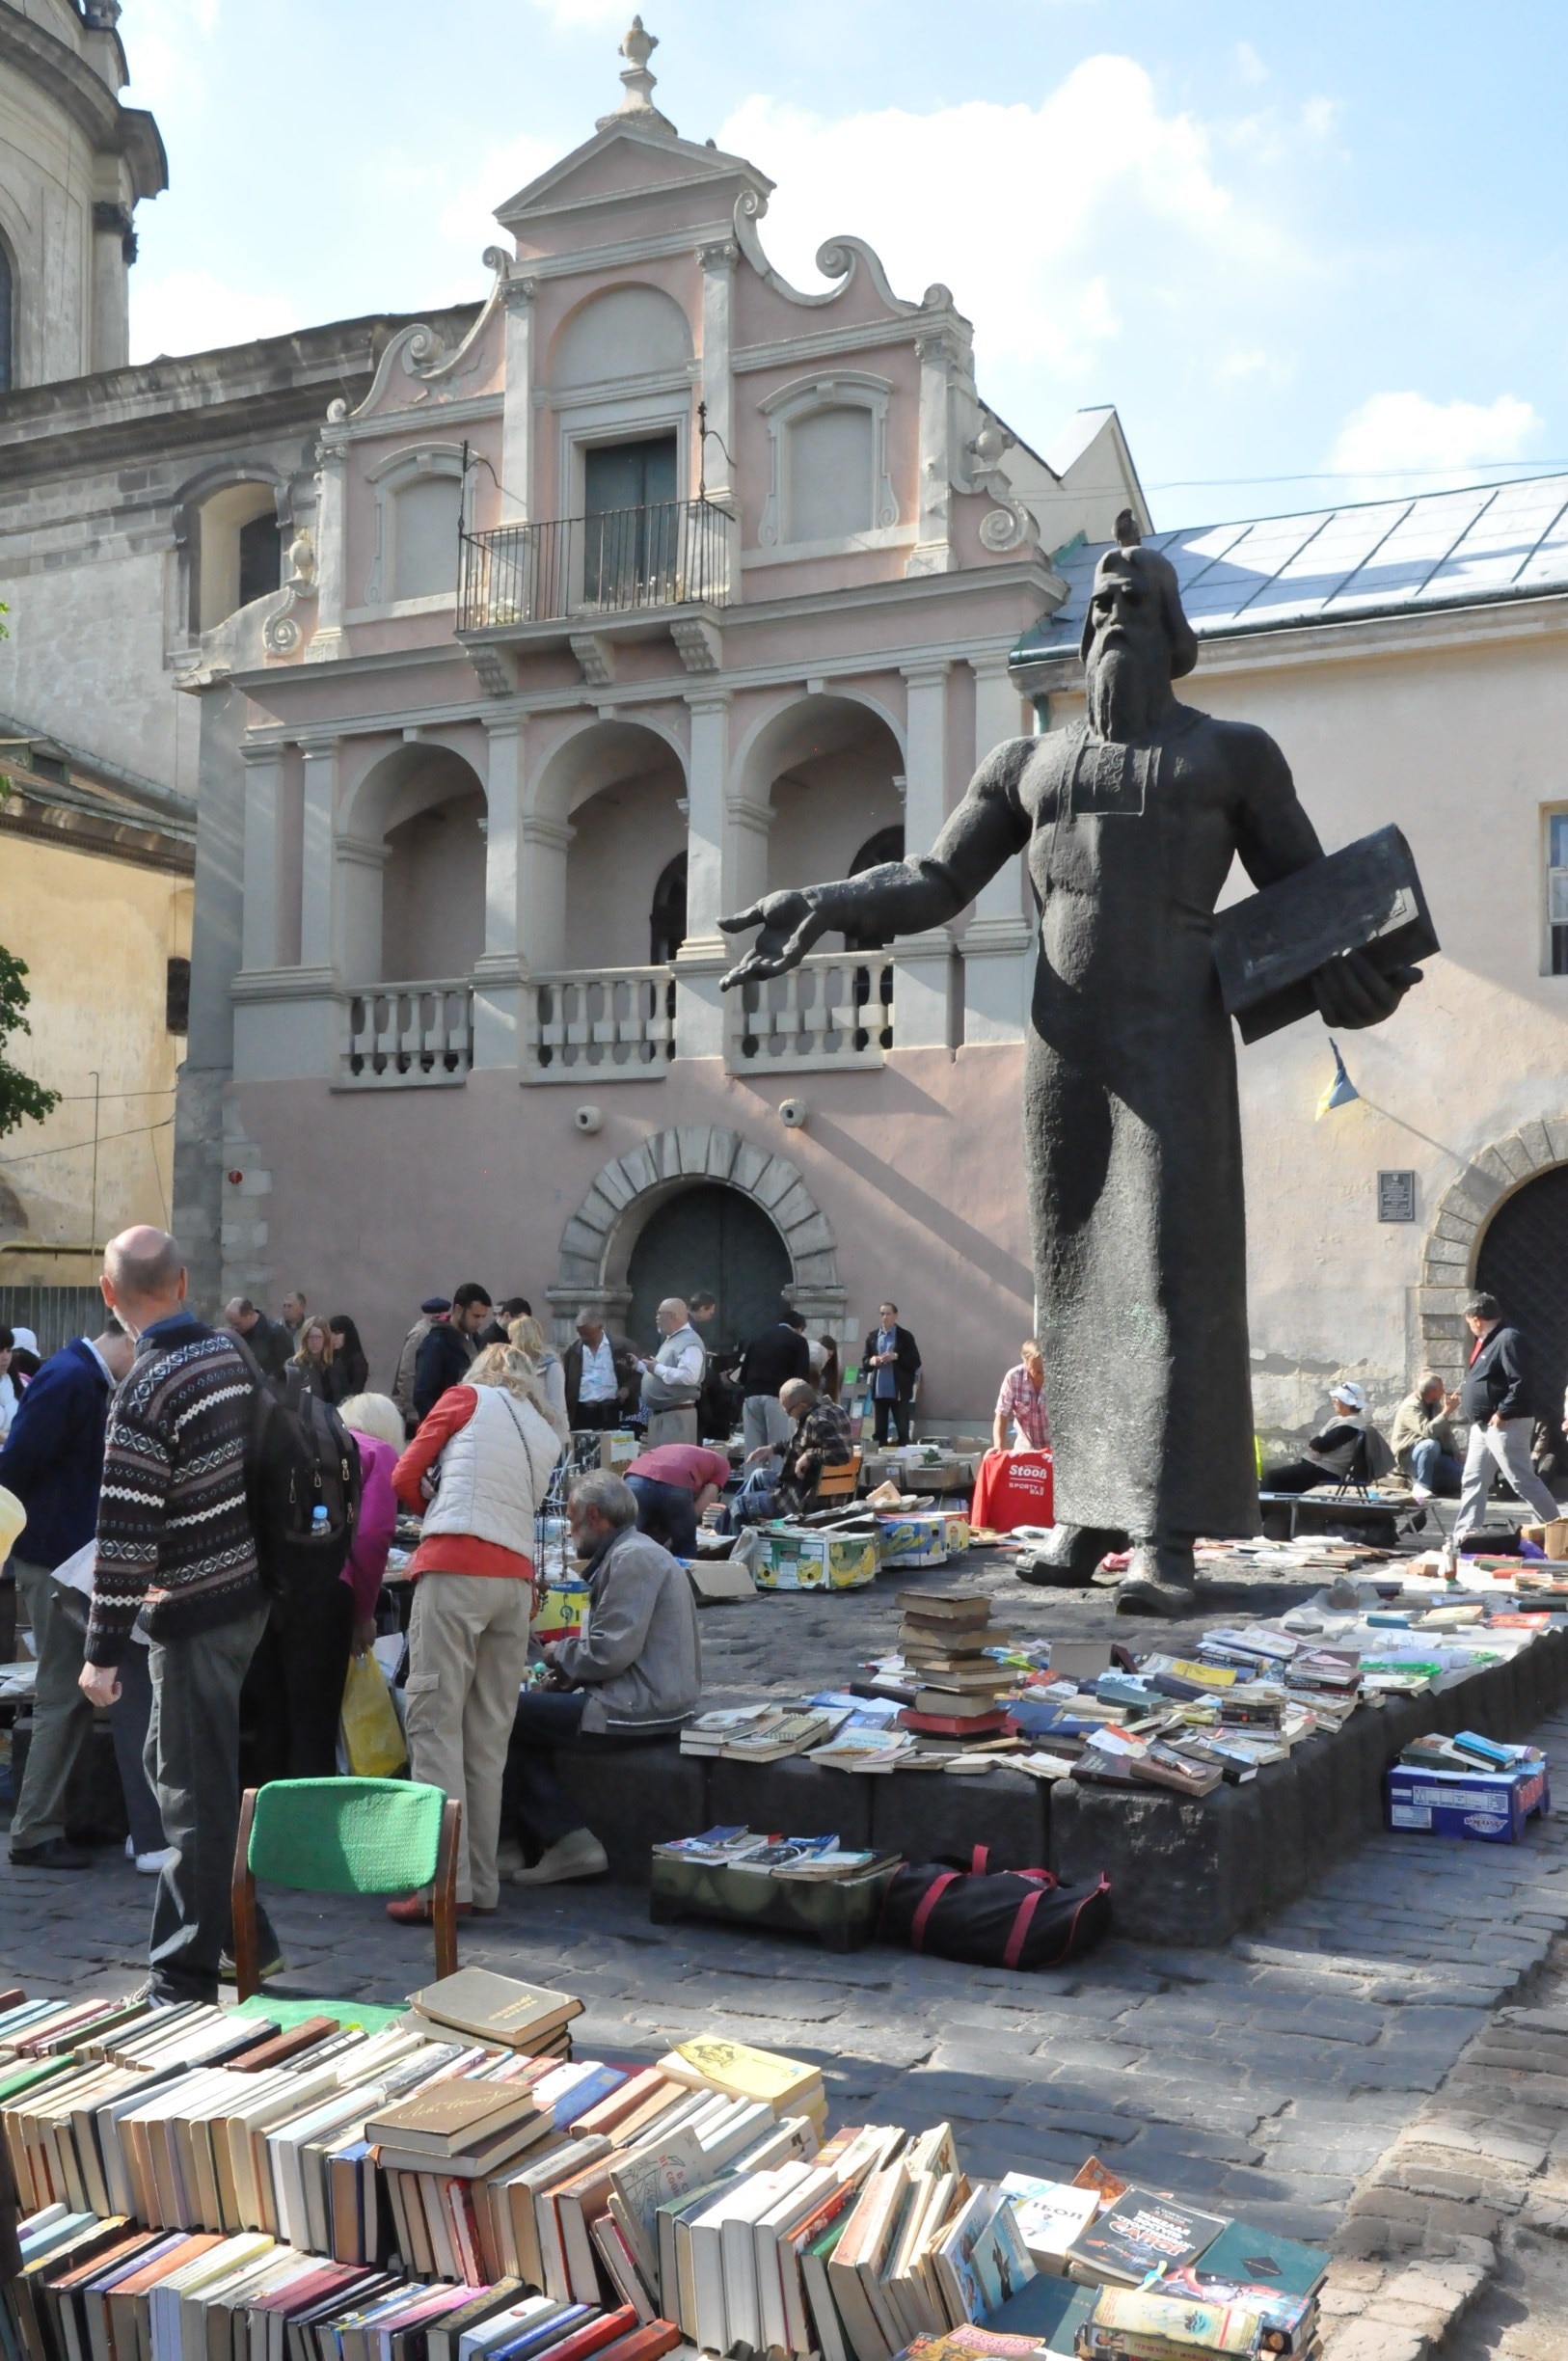 Ivan Federov was a monk who introduced printing to Ukraine.  Fittingly, on weekends, a used book sale springs up in the square at his feet. #market